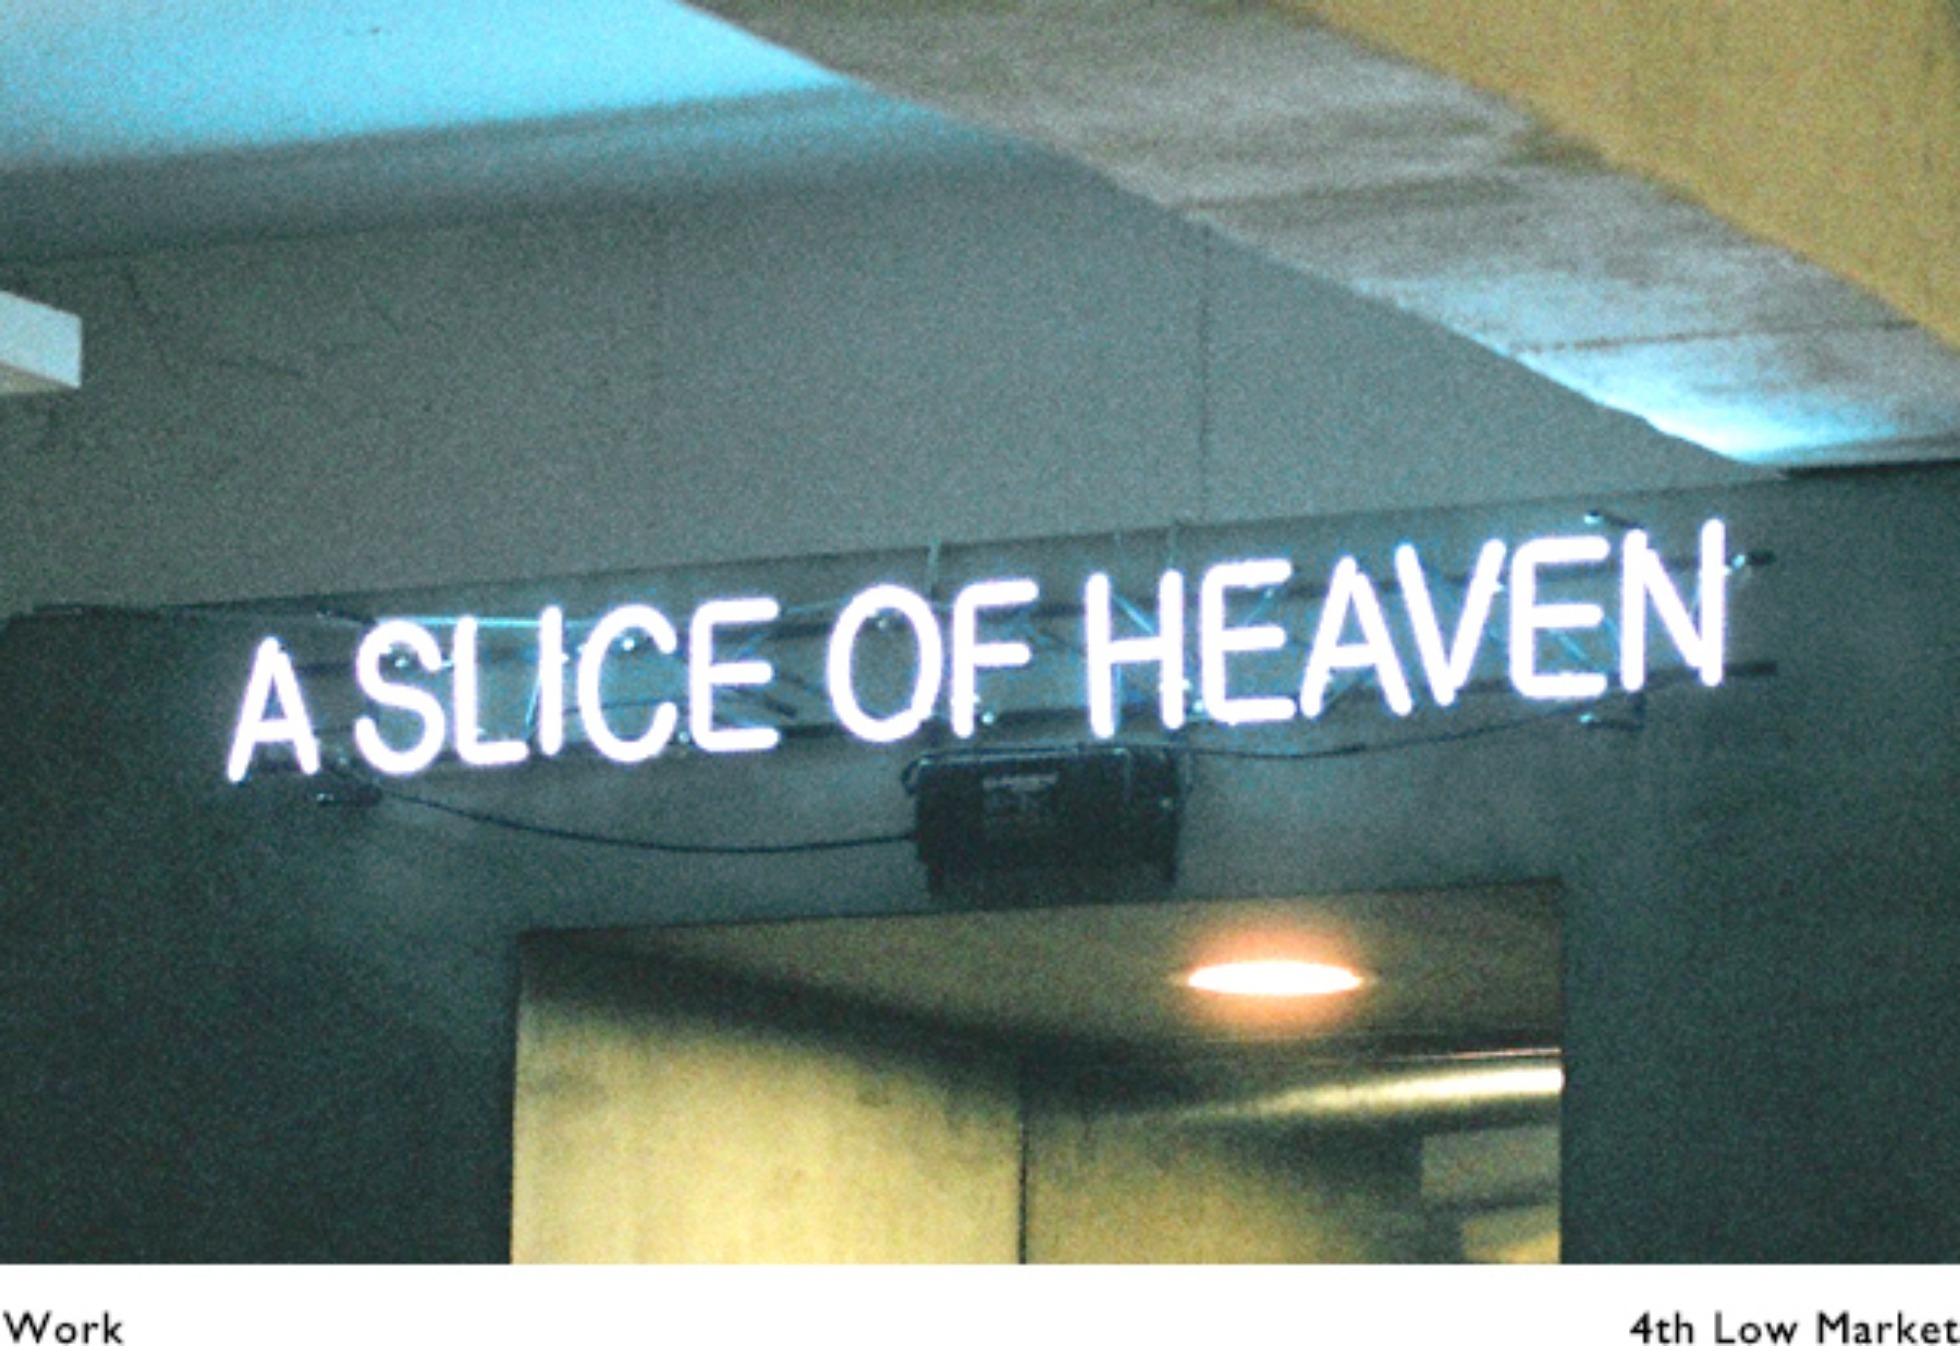 The 4th LOW MARKET &#039;A Slice of heaven&#039;